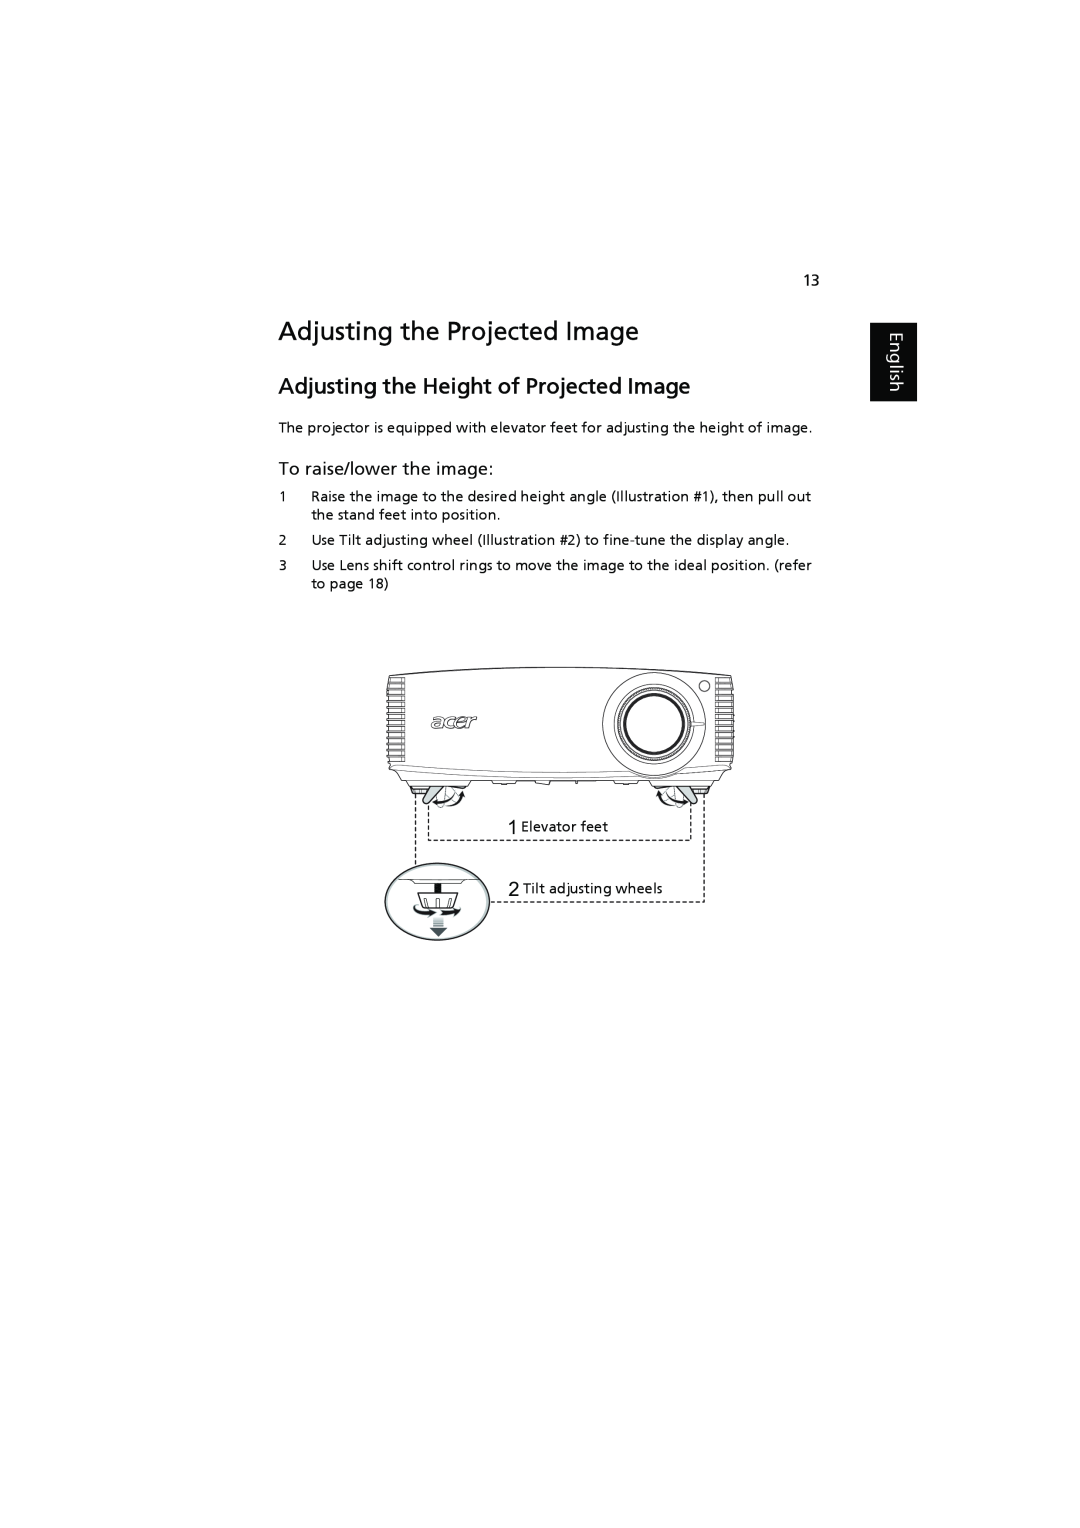 Acer P7203 manual Adjusting the Projected Image, Adjusting the Height of Projected Image, To raise/lower the image, English 